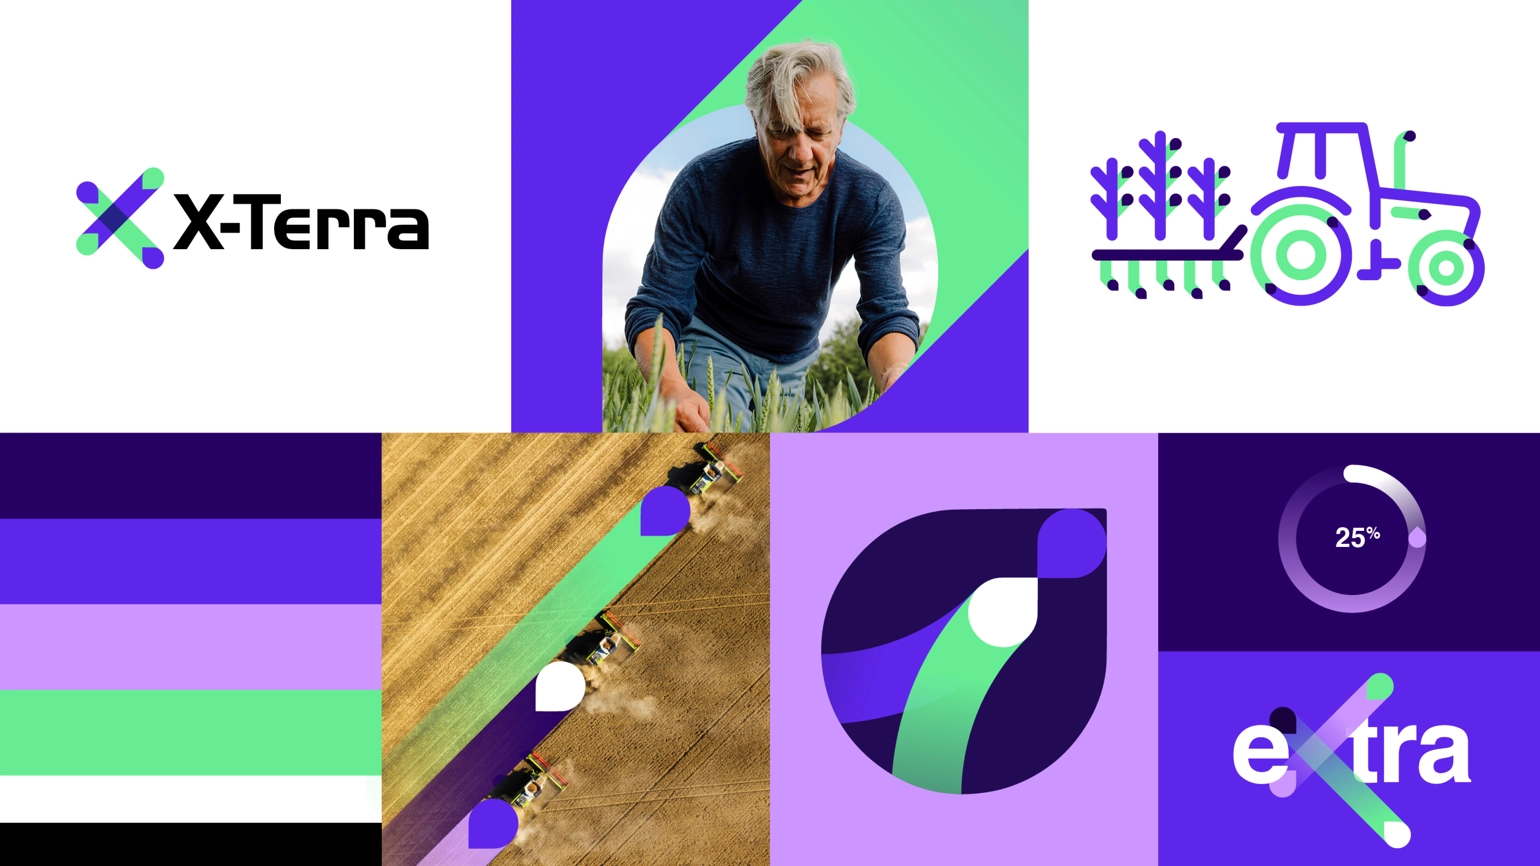 The design system of Syngenta X-Terra with colour, icon and logo